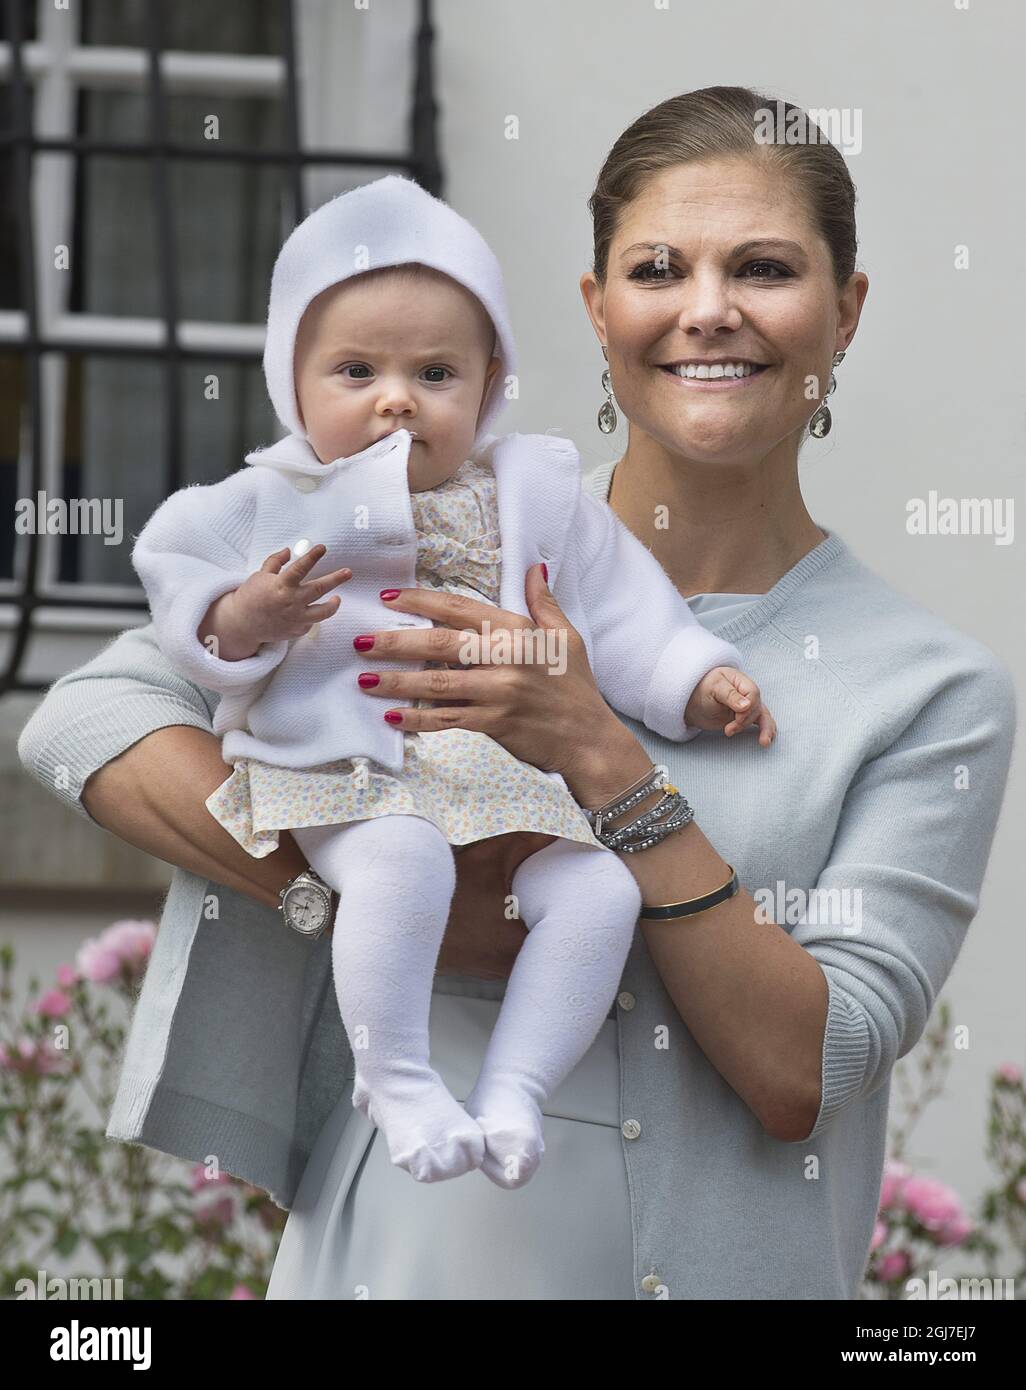 BORGHOLM 20120714 Swedish Crown Princess Victoria, Prince Daniel and their daughter Estelle, Queen Silvia and King Carl XVI Gustaf, at the courtyard of the royal family's summer residence Solliden, on the island of Oeland, Sweden, on July 14, 2012, during the celebrations of Crown Princess Victorias 35th birthday.  Photo Jonas Ekstromer / SCANPIX code 10030  Stock Photo